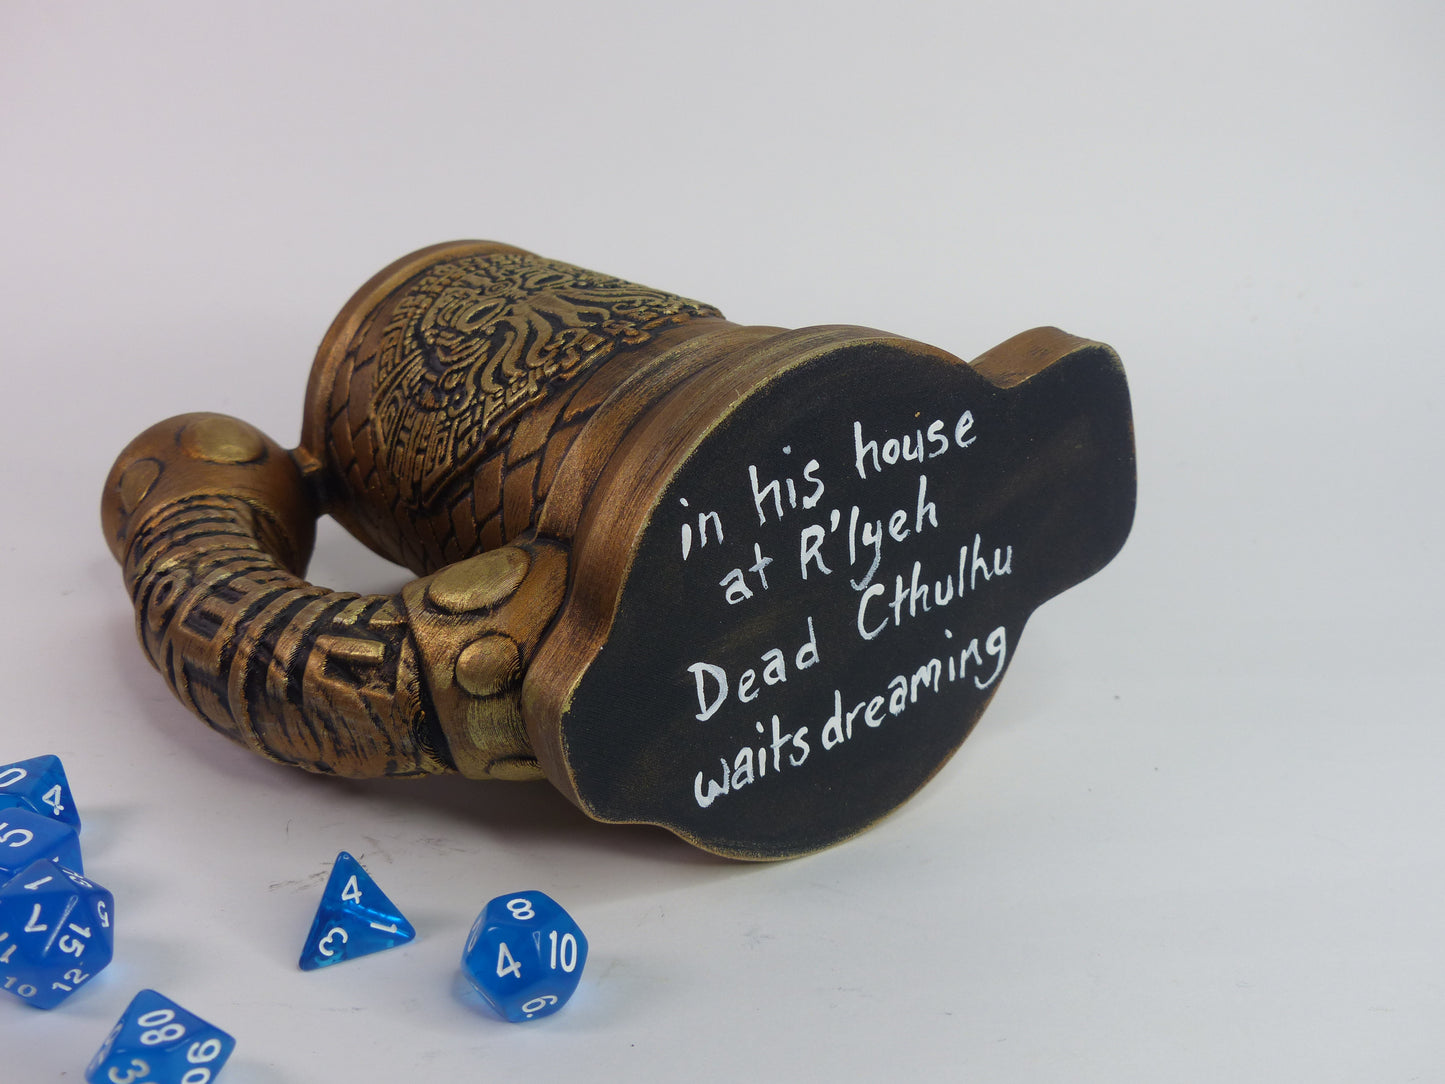 Cthulhu Can Cosy/Cozy DnD Dice Tower - 3D printed and hand painted - Can be personalised!